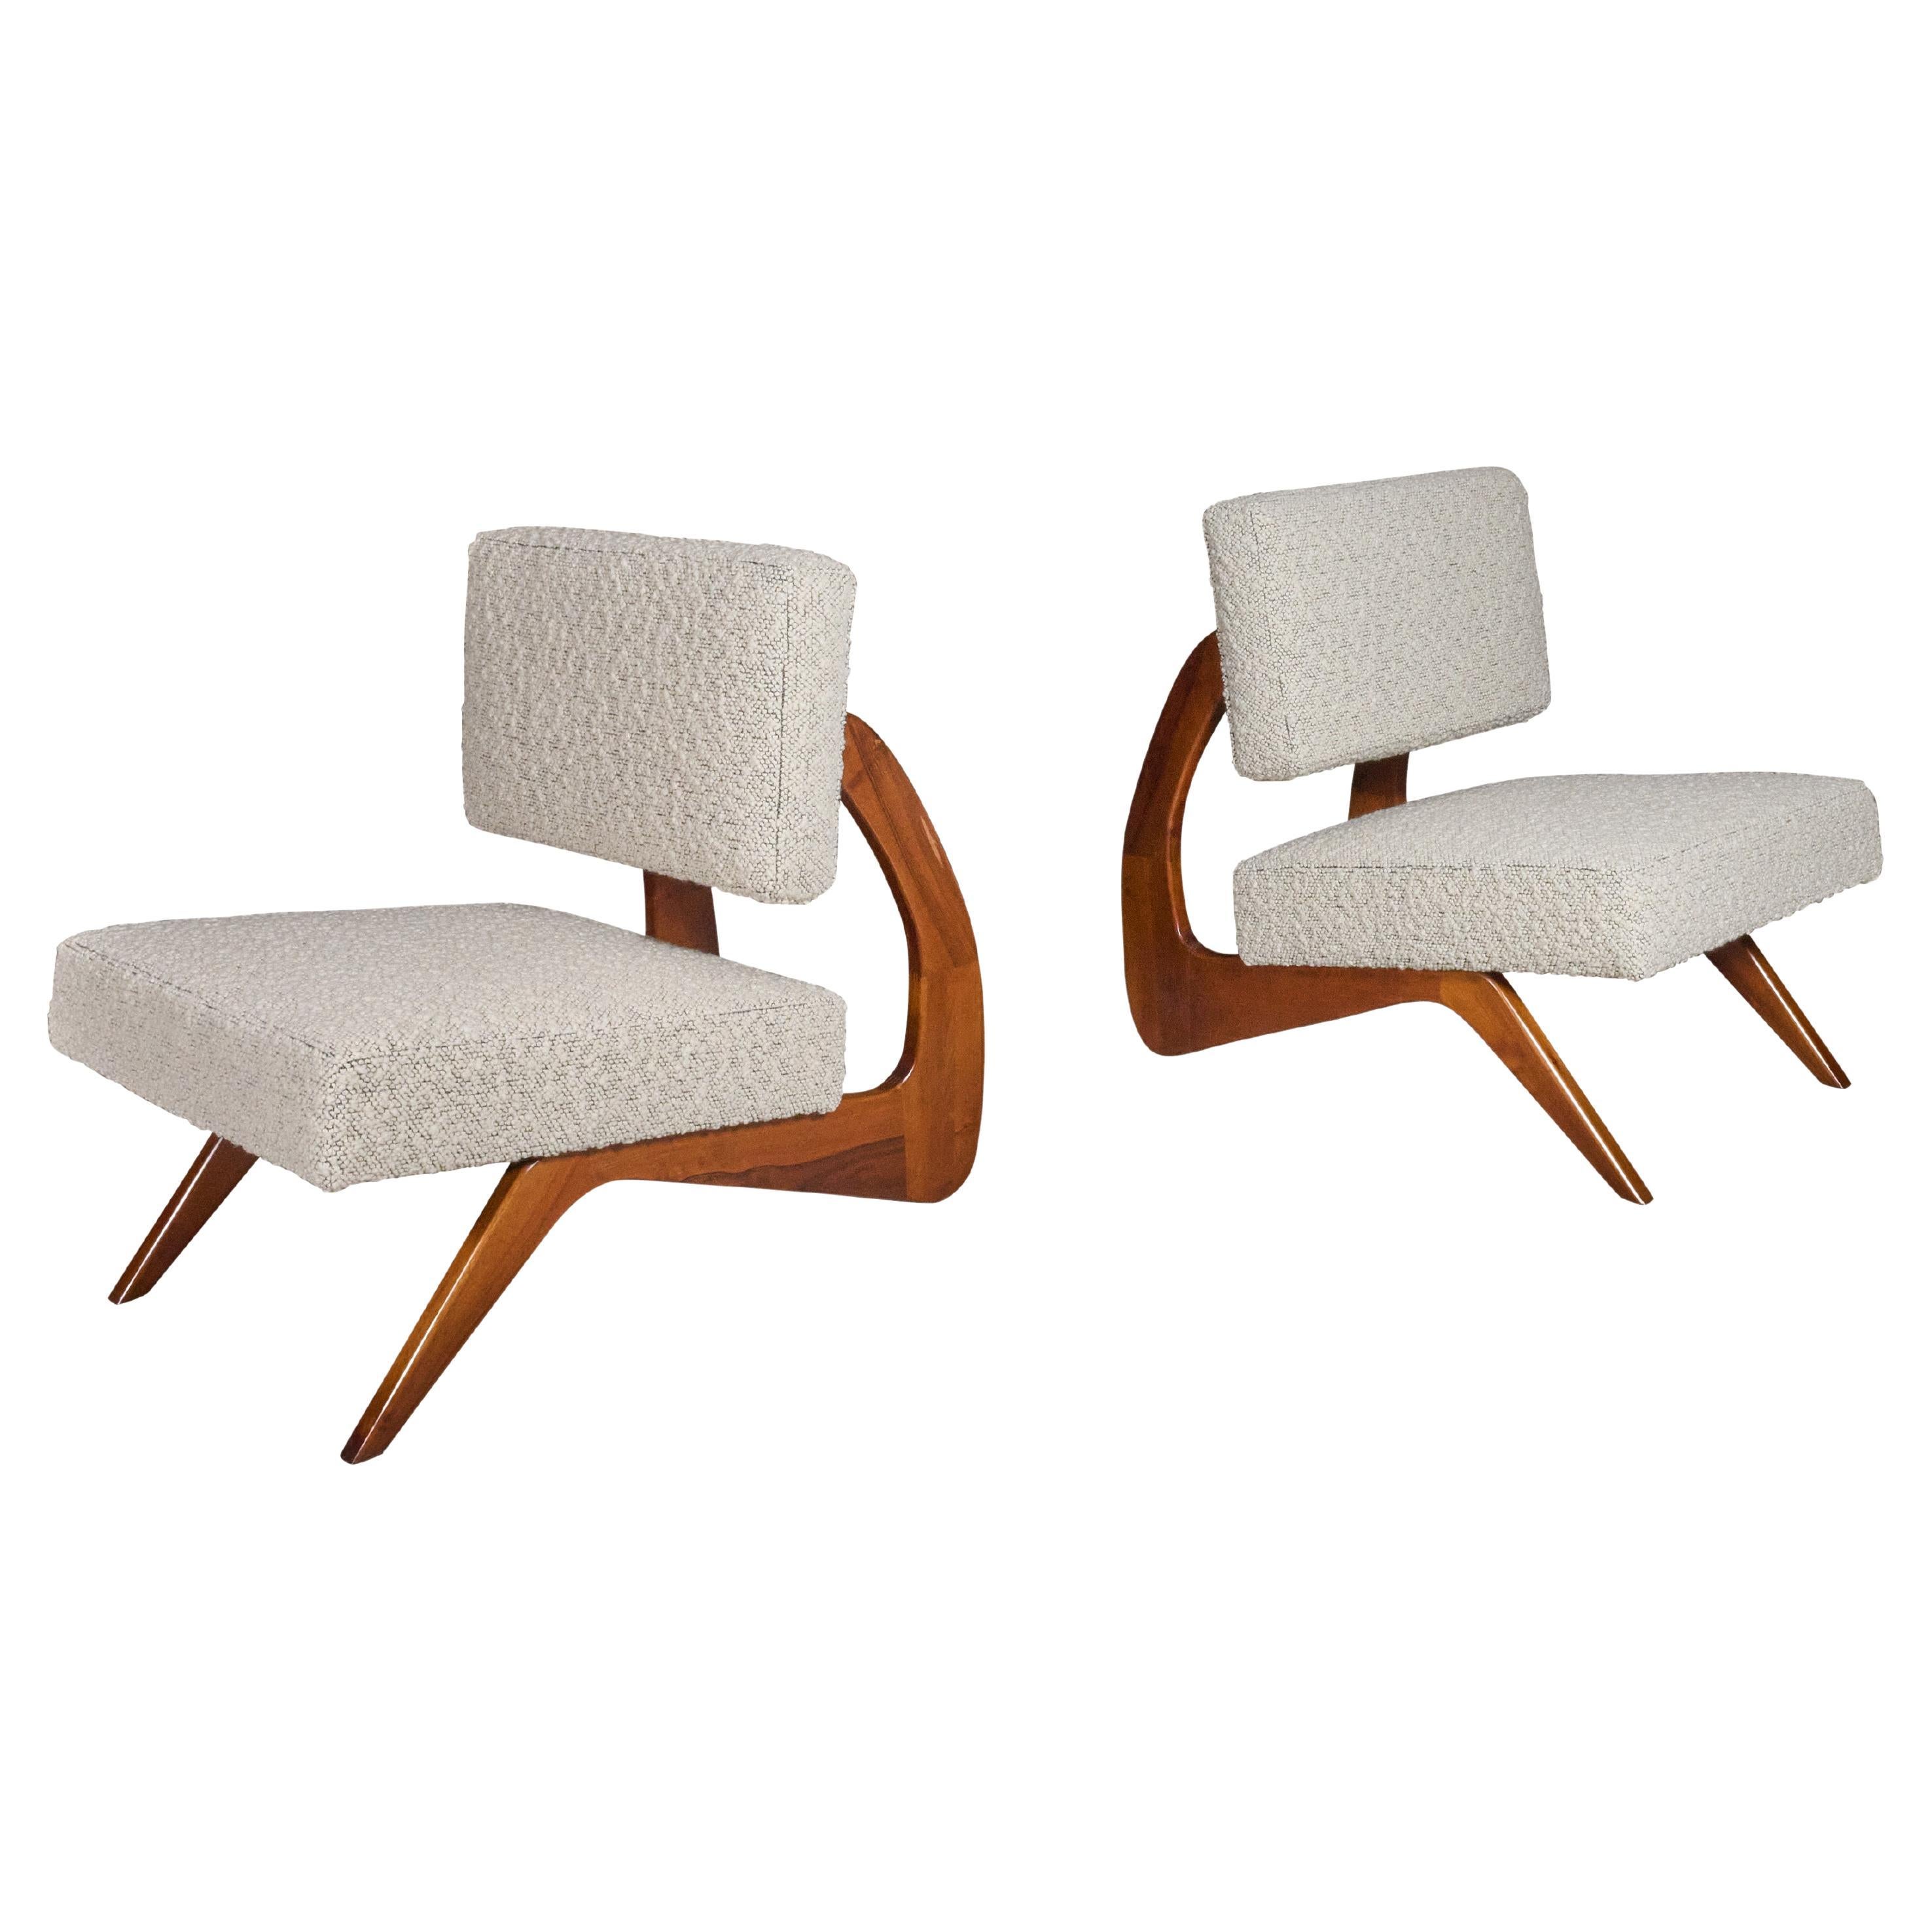 Pair of Upholstered Mid-Century Designed Chairs For Sale